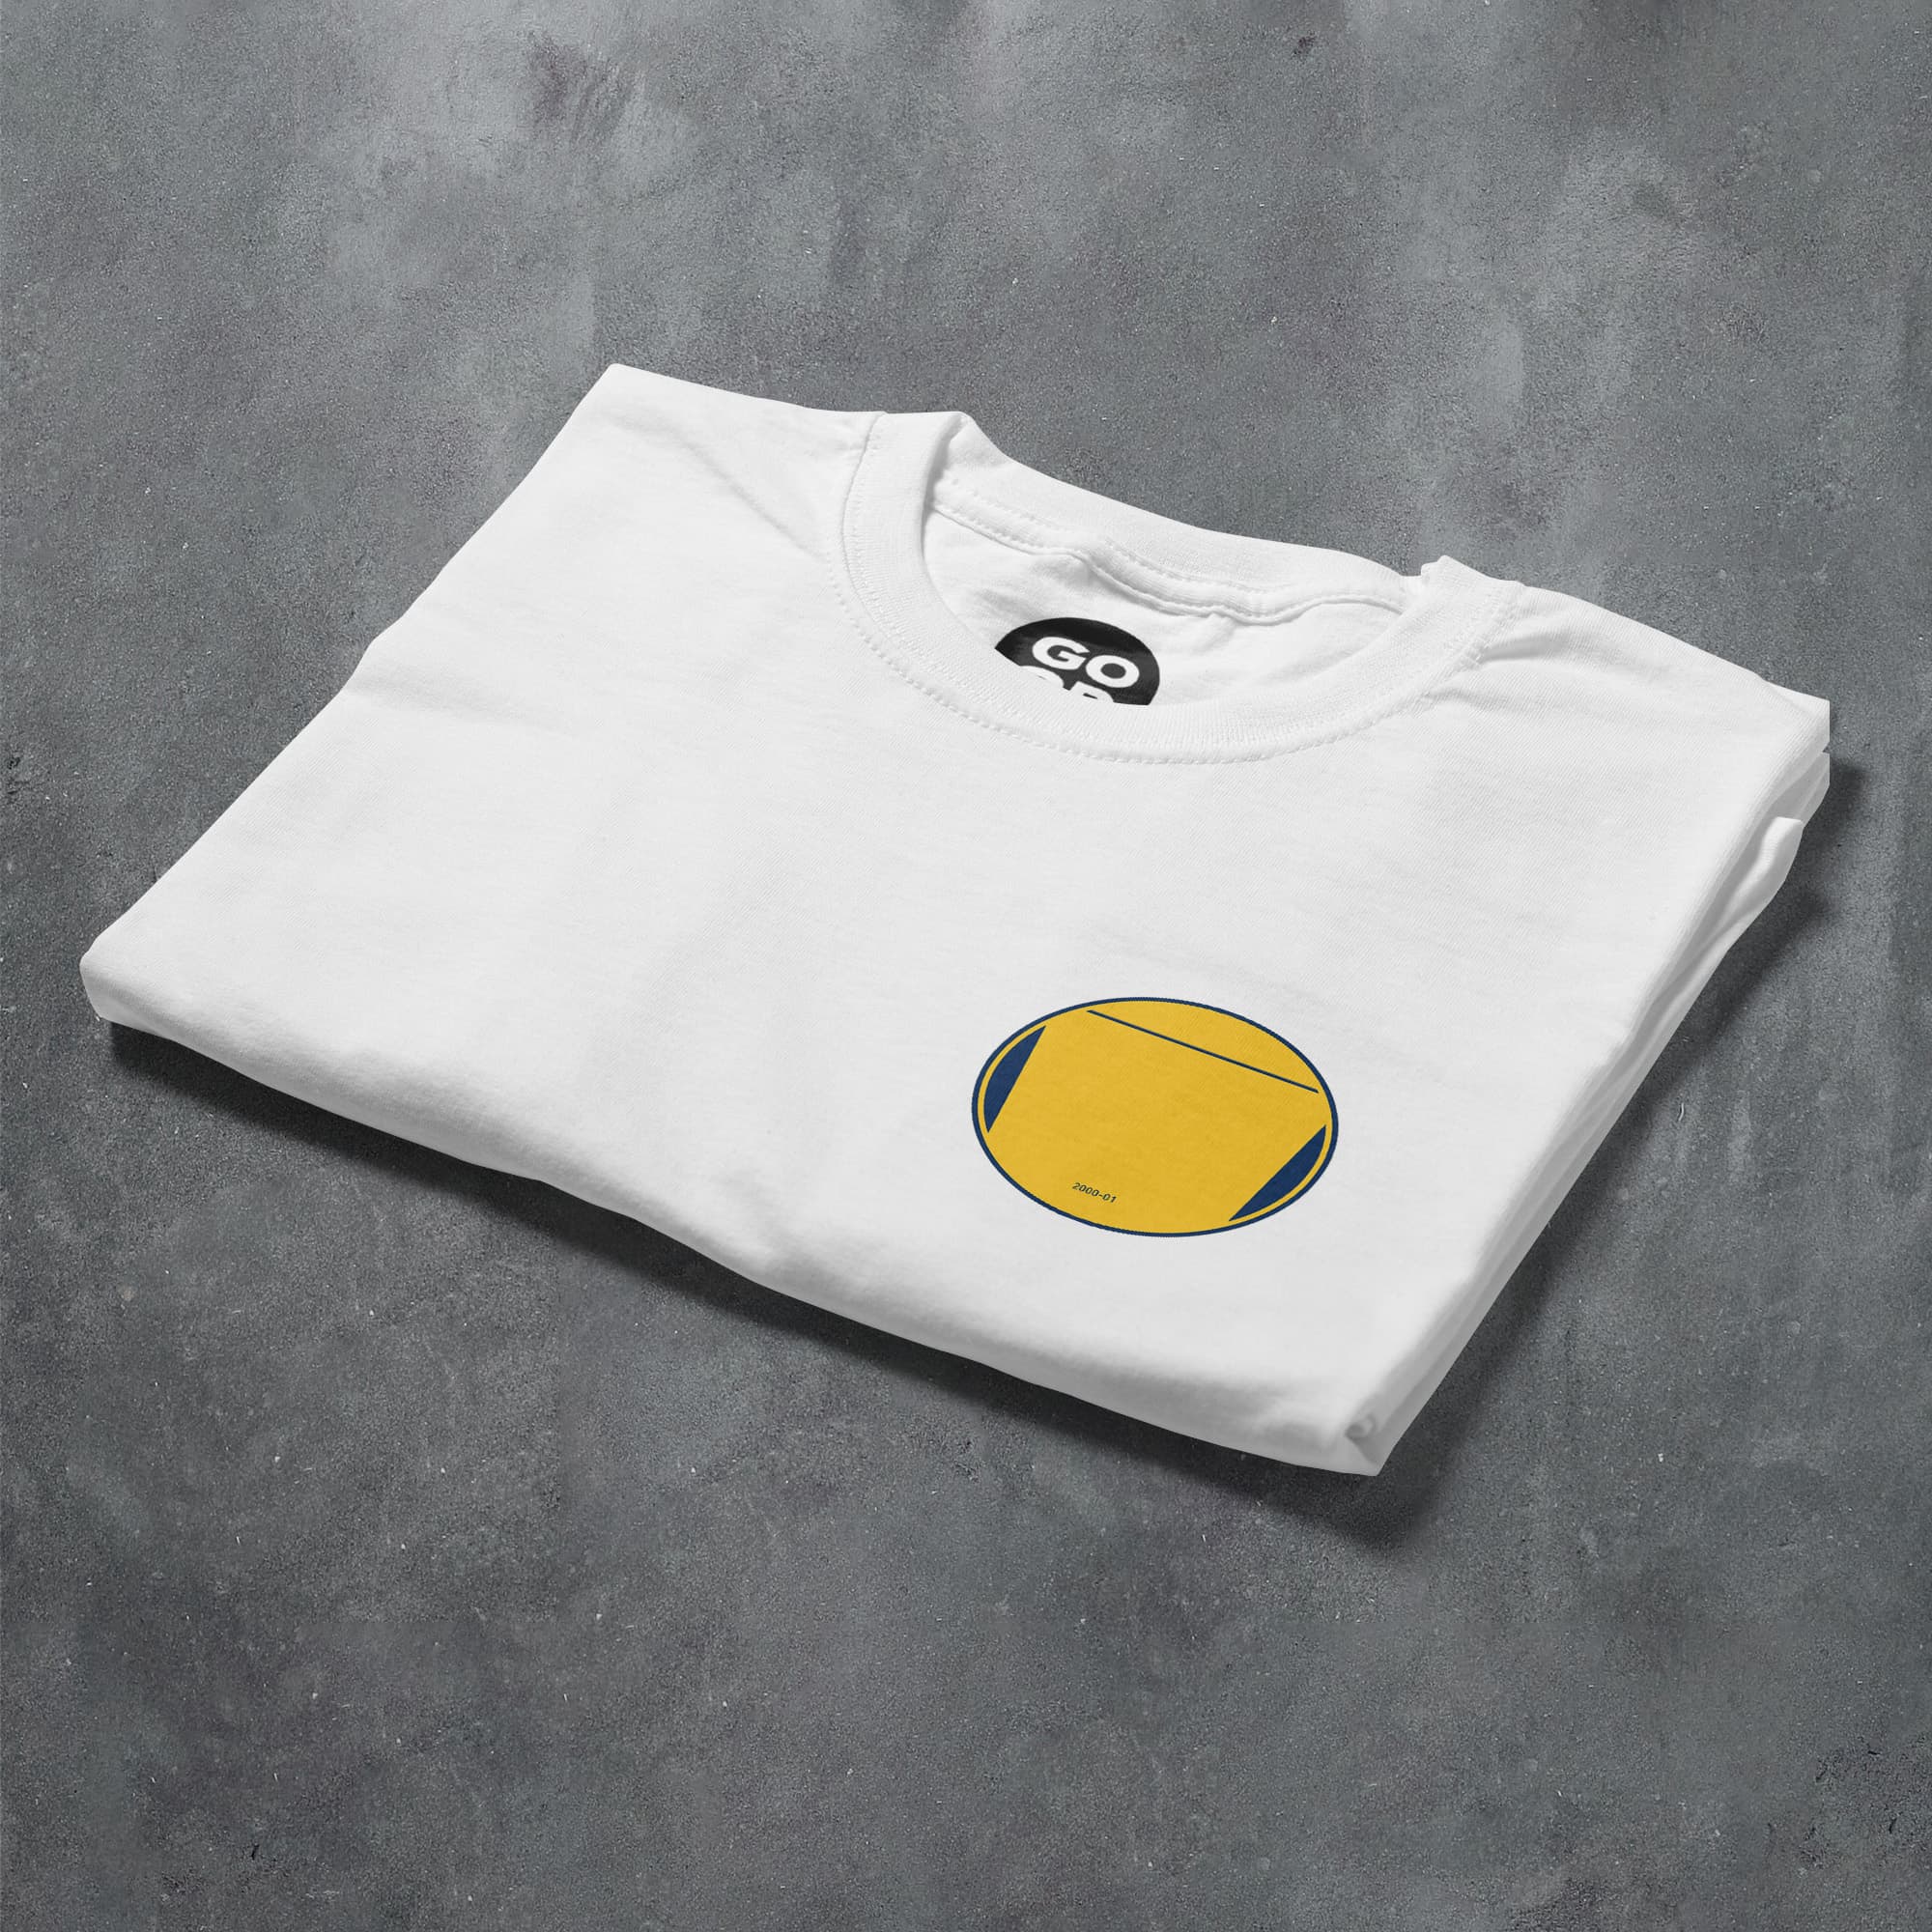 a white t - shirt with a yellow ball on it